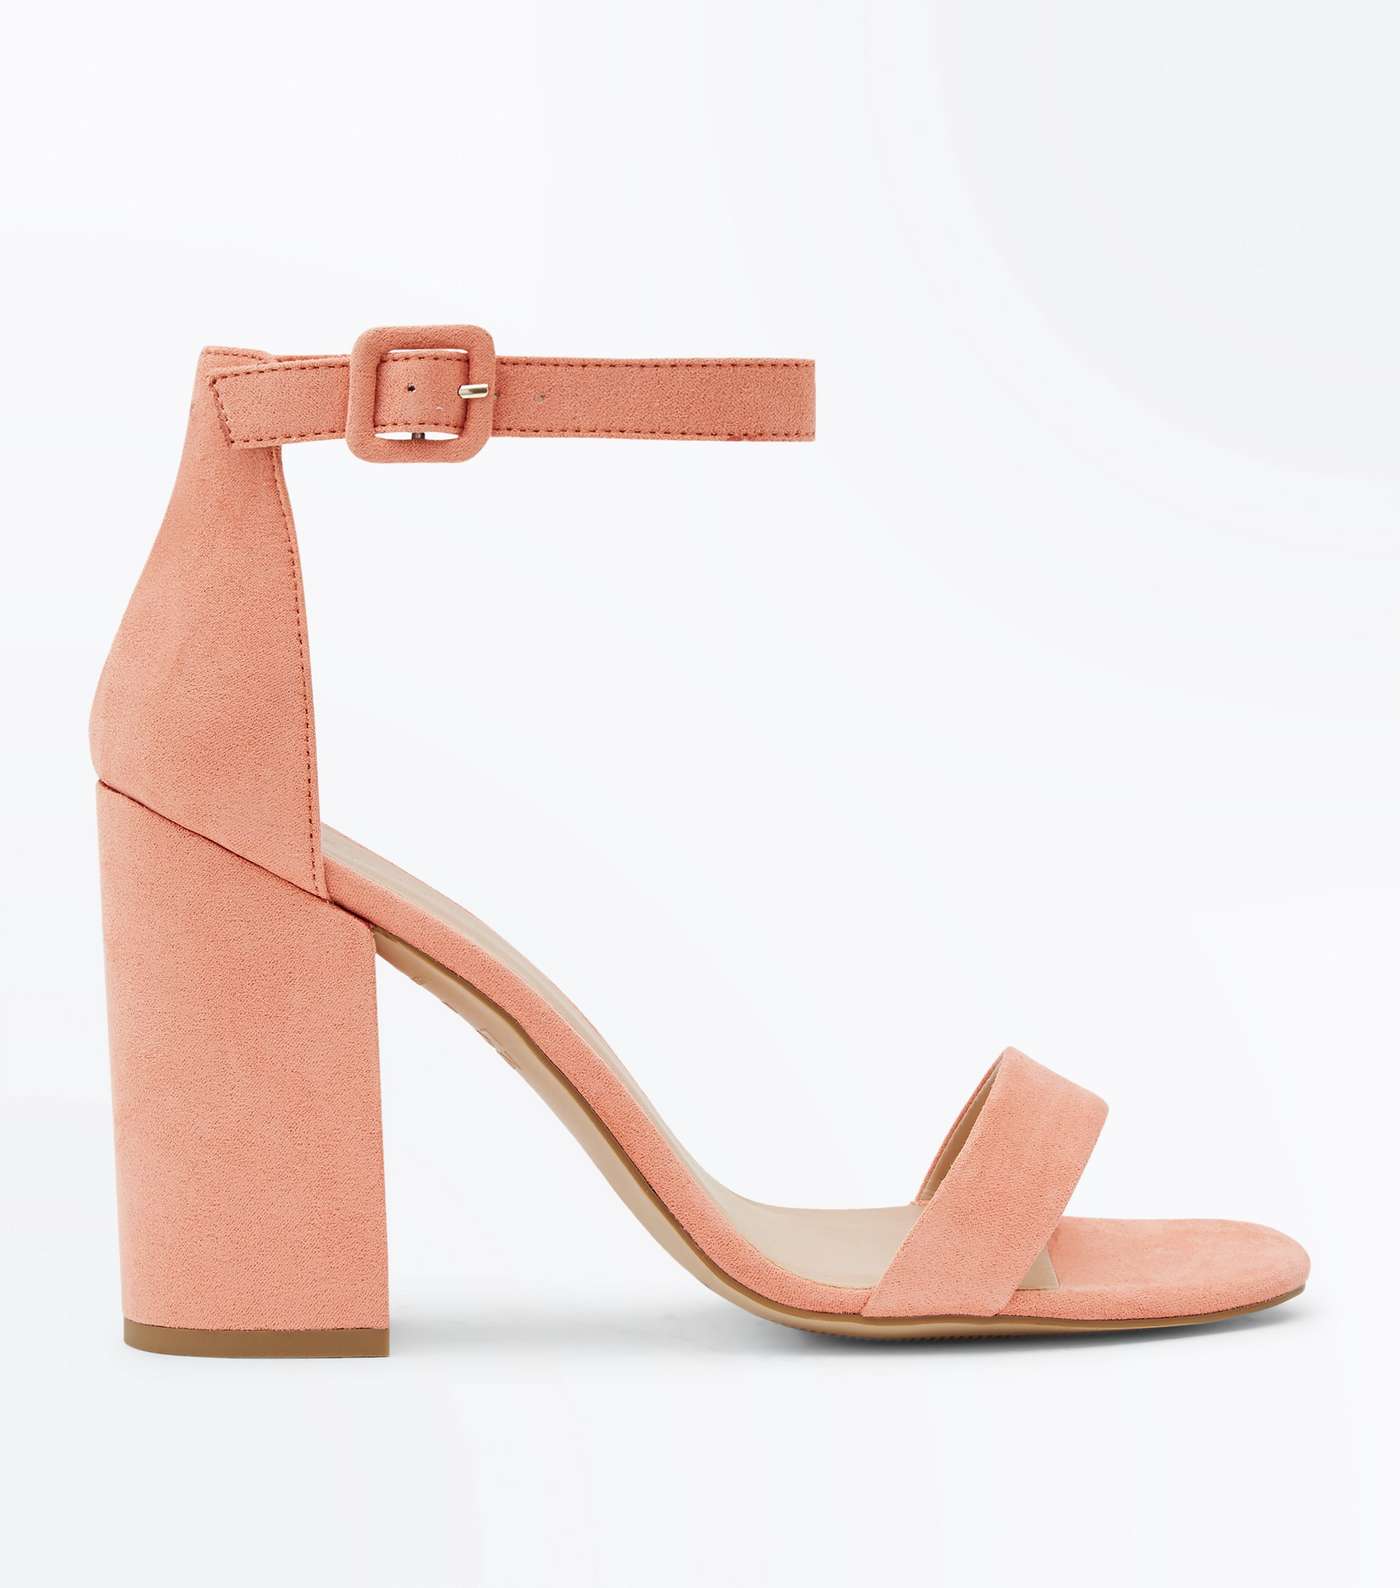 Coral Suedette Barely There Block Heels